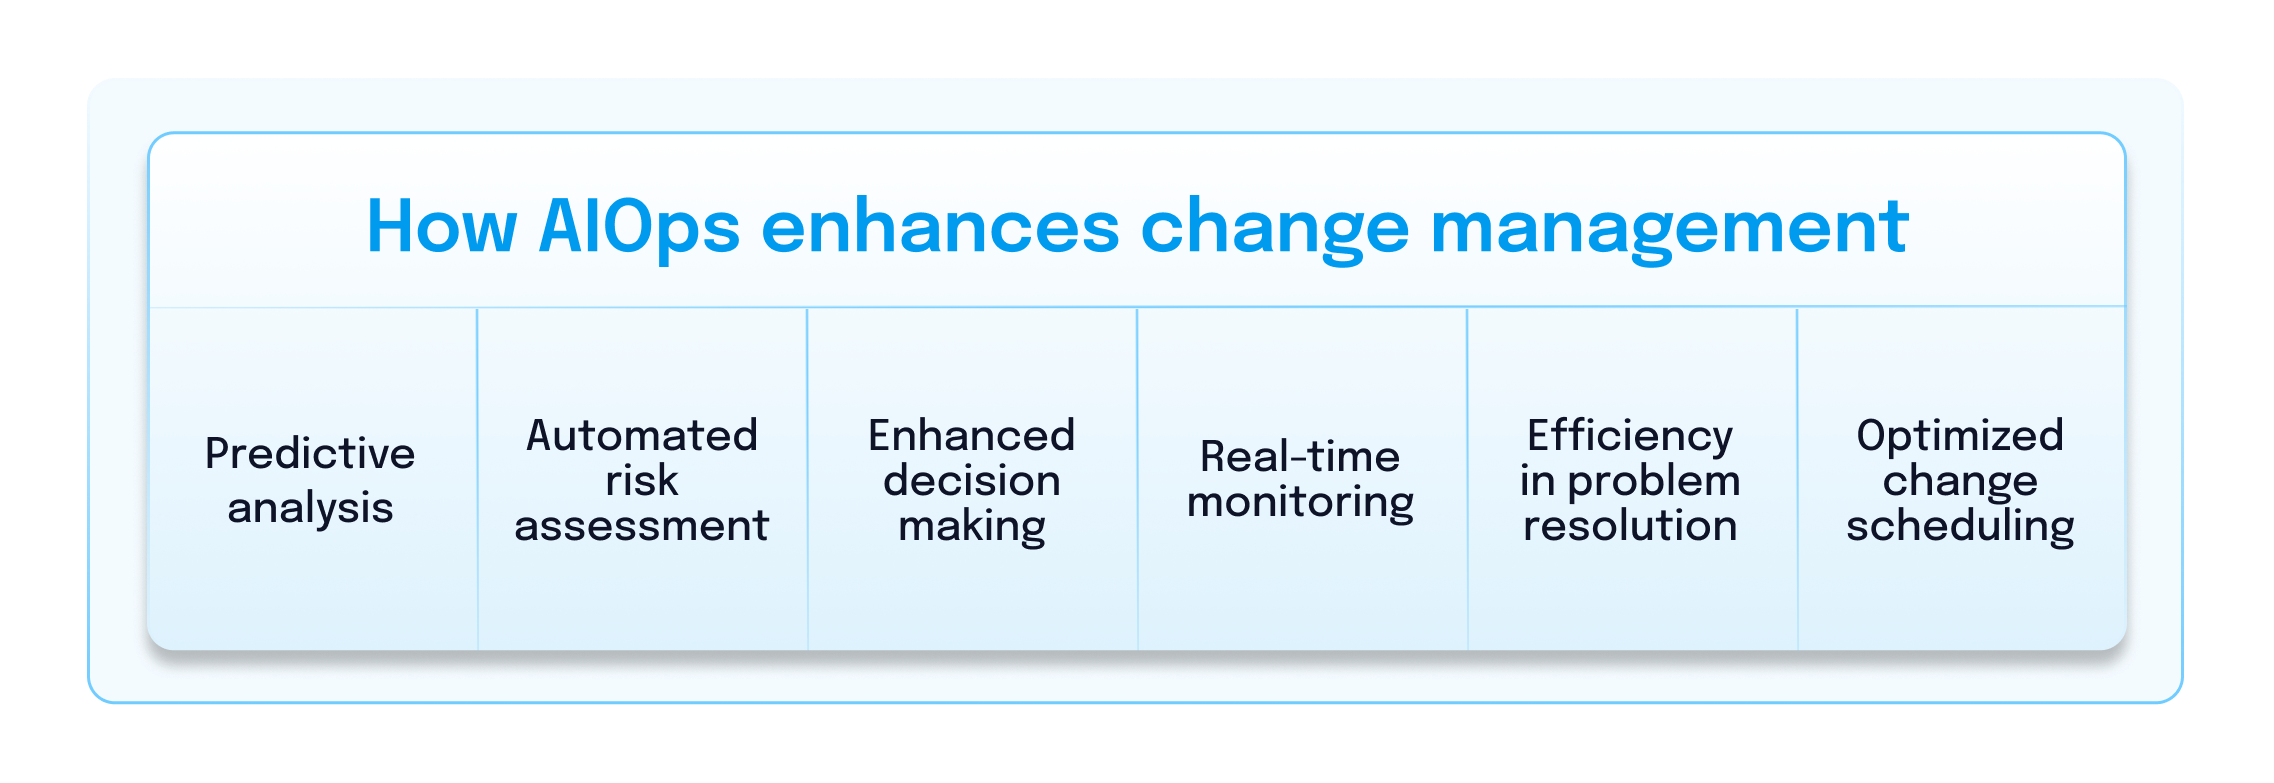 How AIOps enhances change management: Predictive analysis, Automated risk assessment, Enhanced decision making, Real-time monitoring, Efficiency in problem resolution, Optimized change scheduling